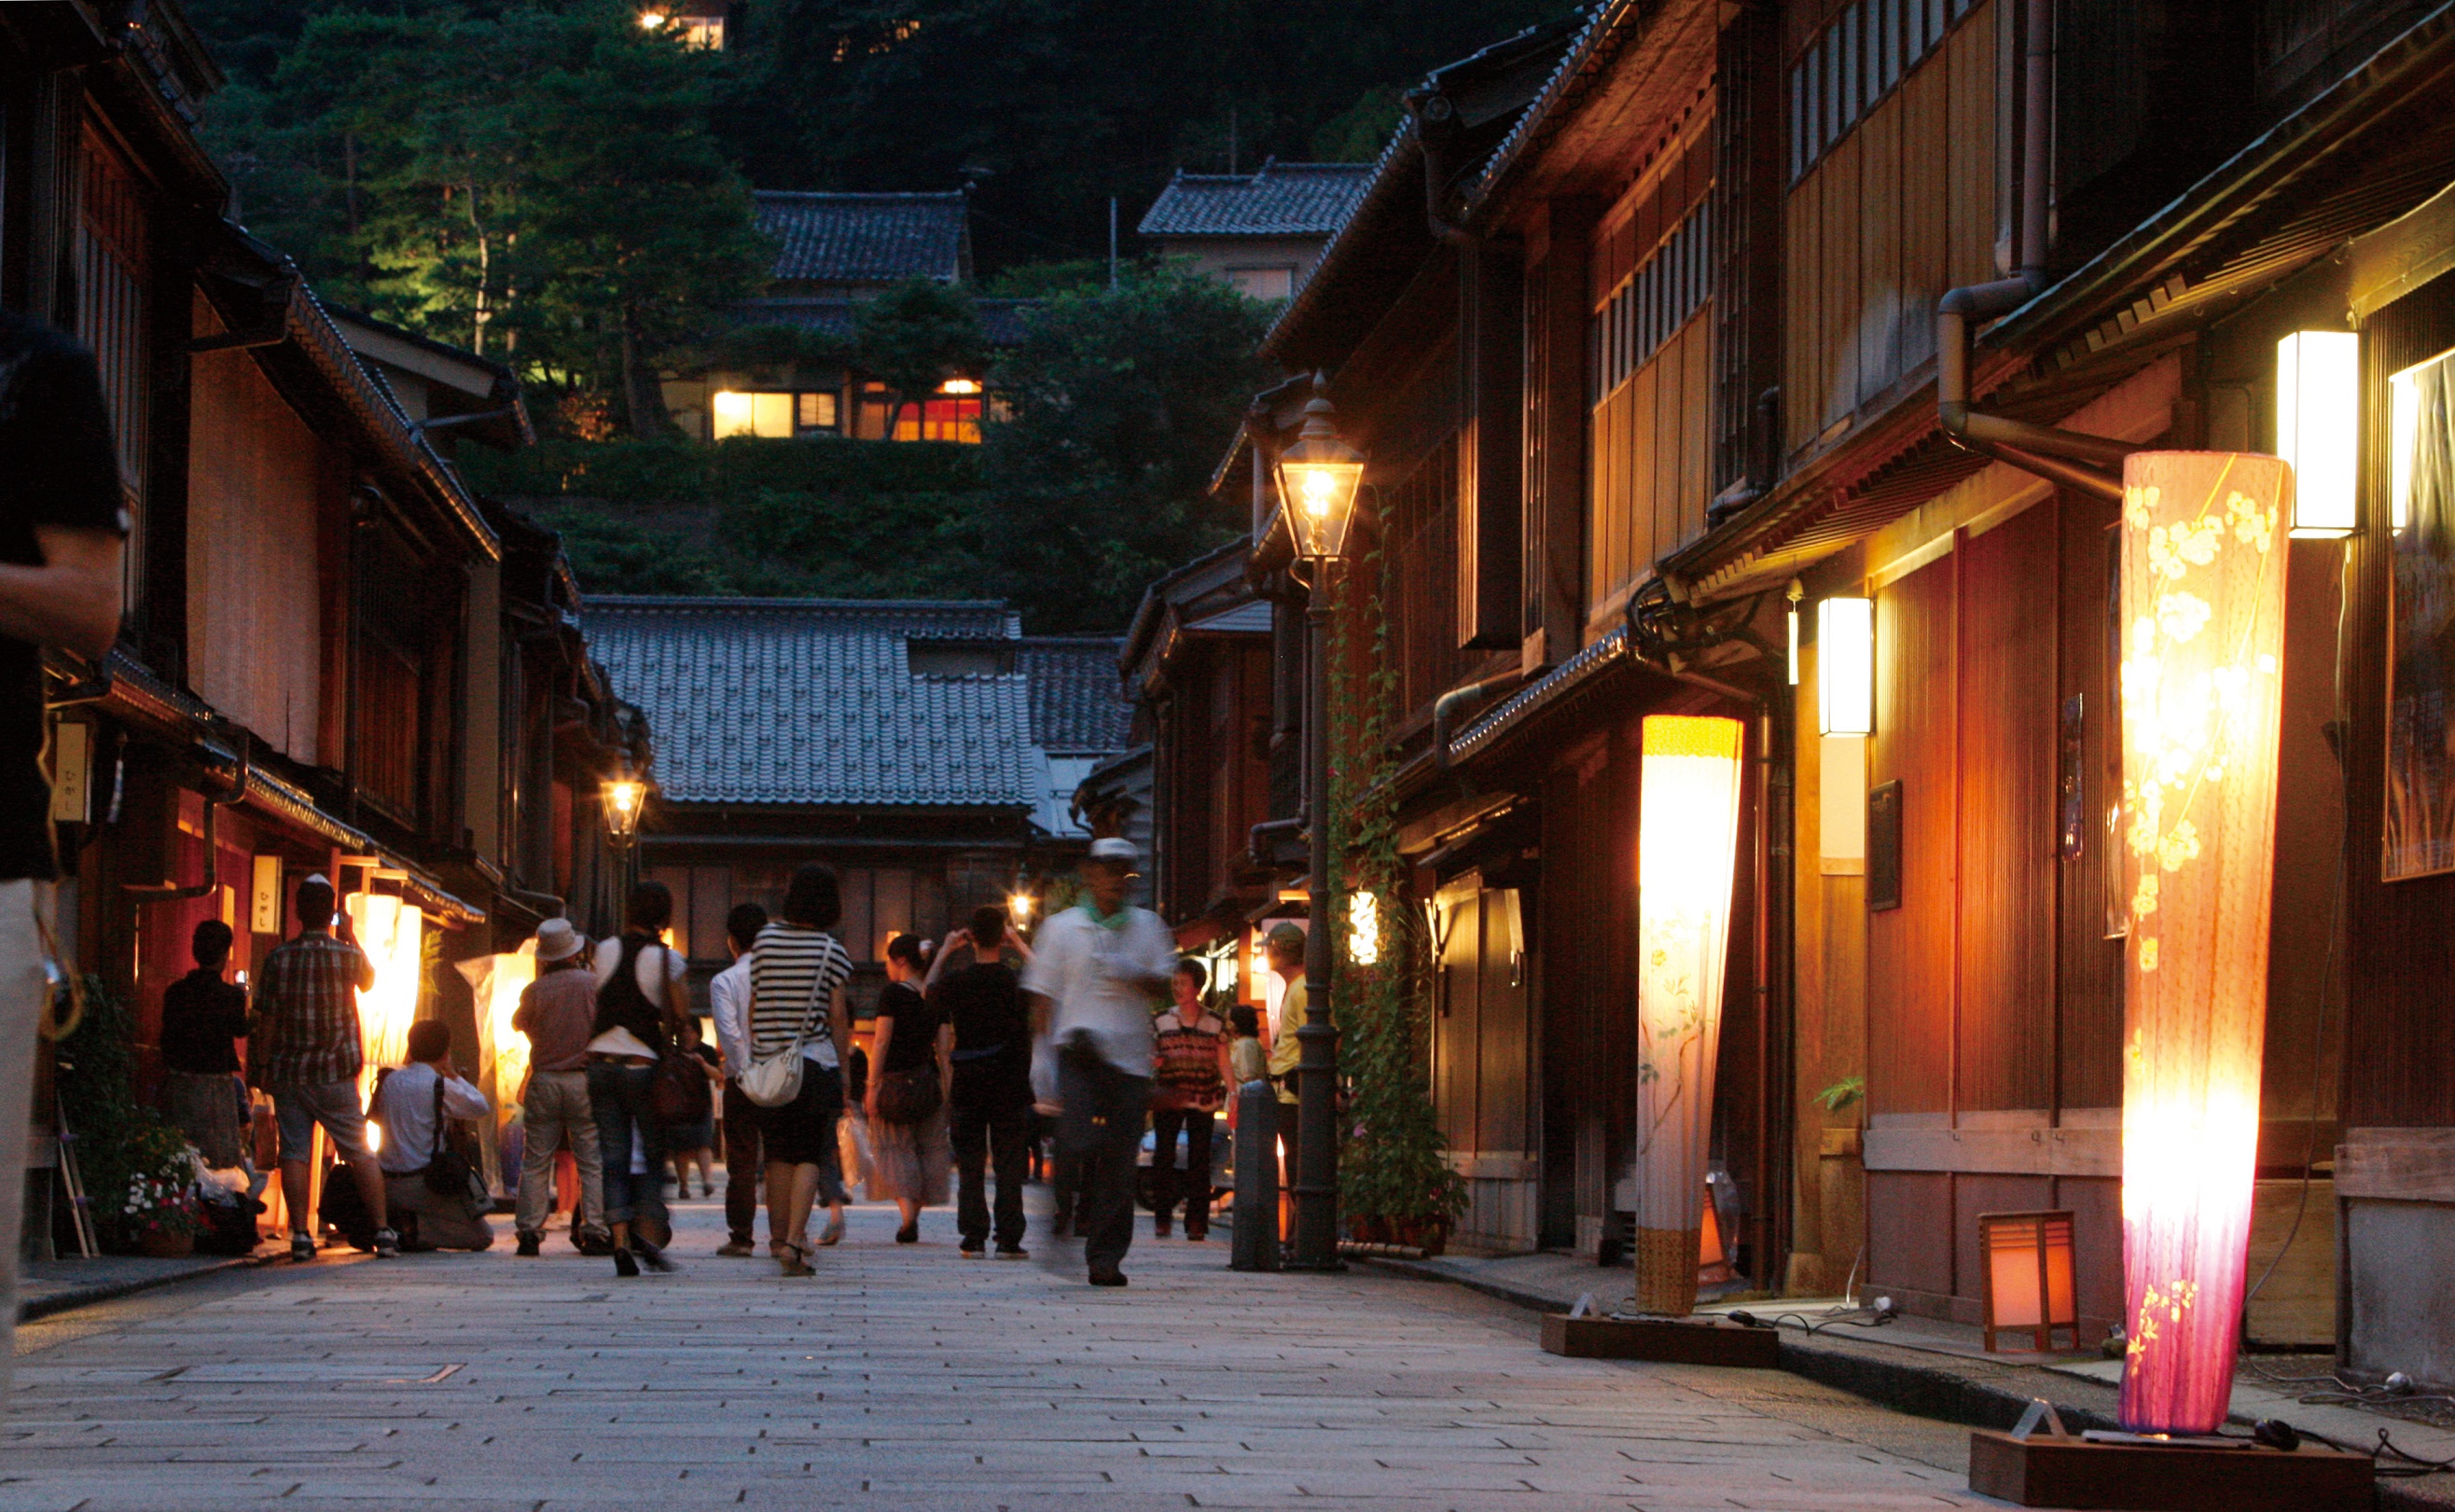 【Only 1 group per day】Guided Night Exploration of Kanazawa's Samurai Culture